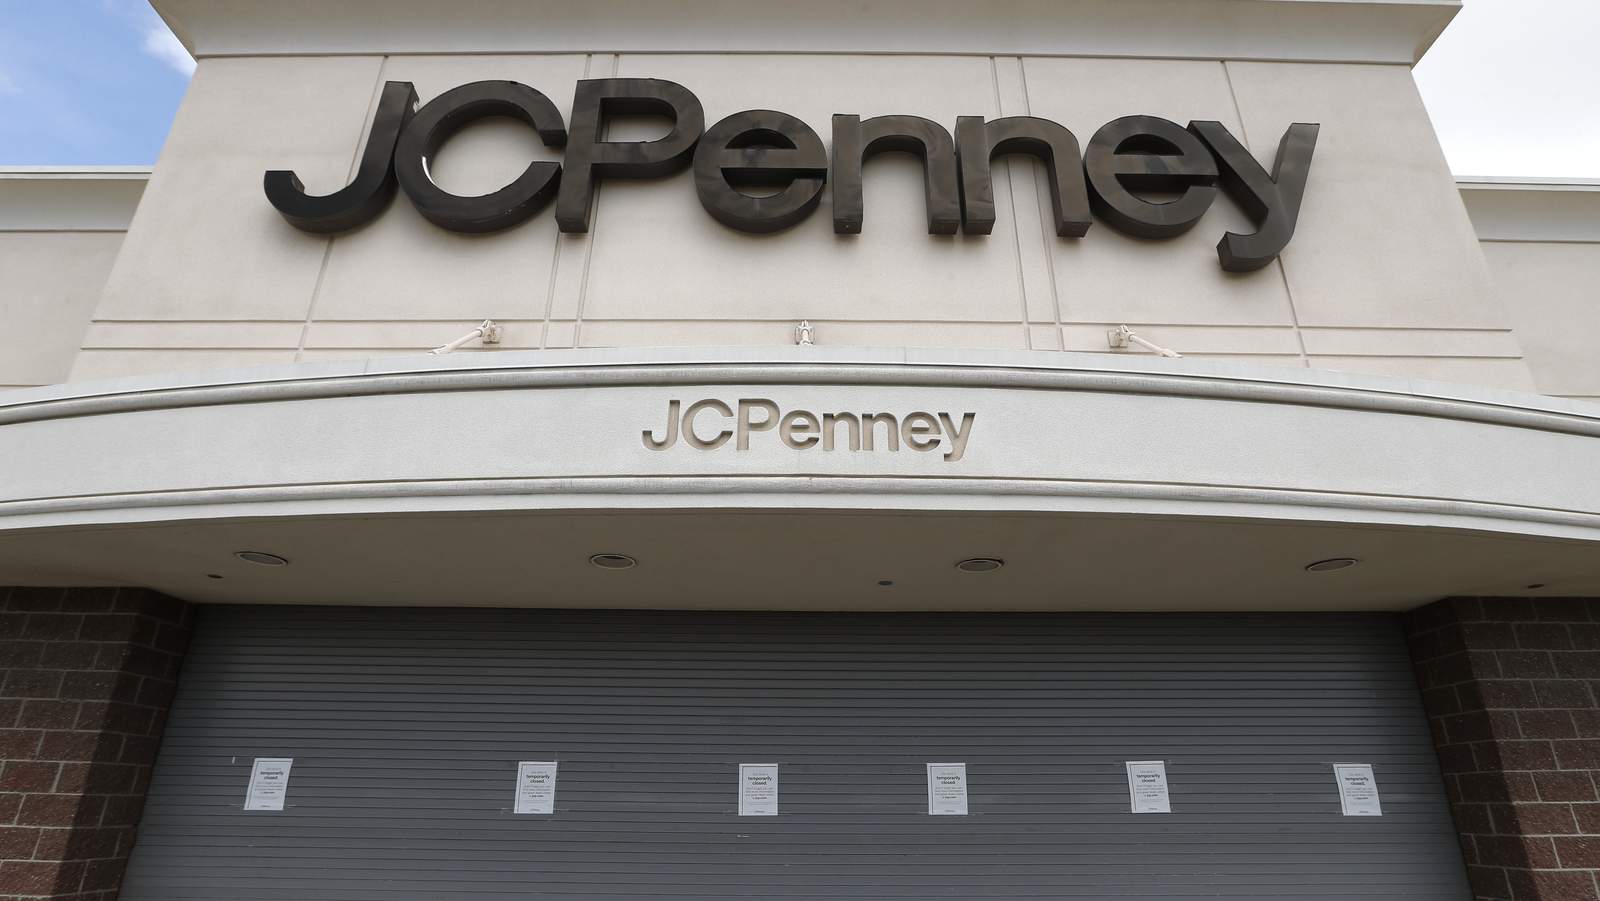 JC Penney plans to close more than 240 stores